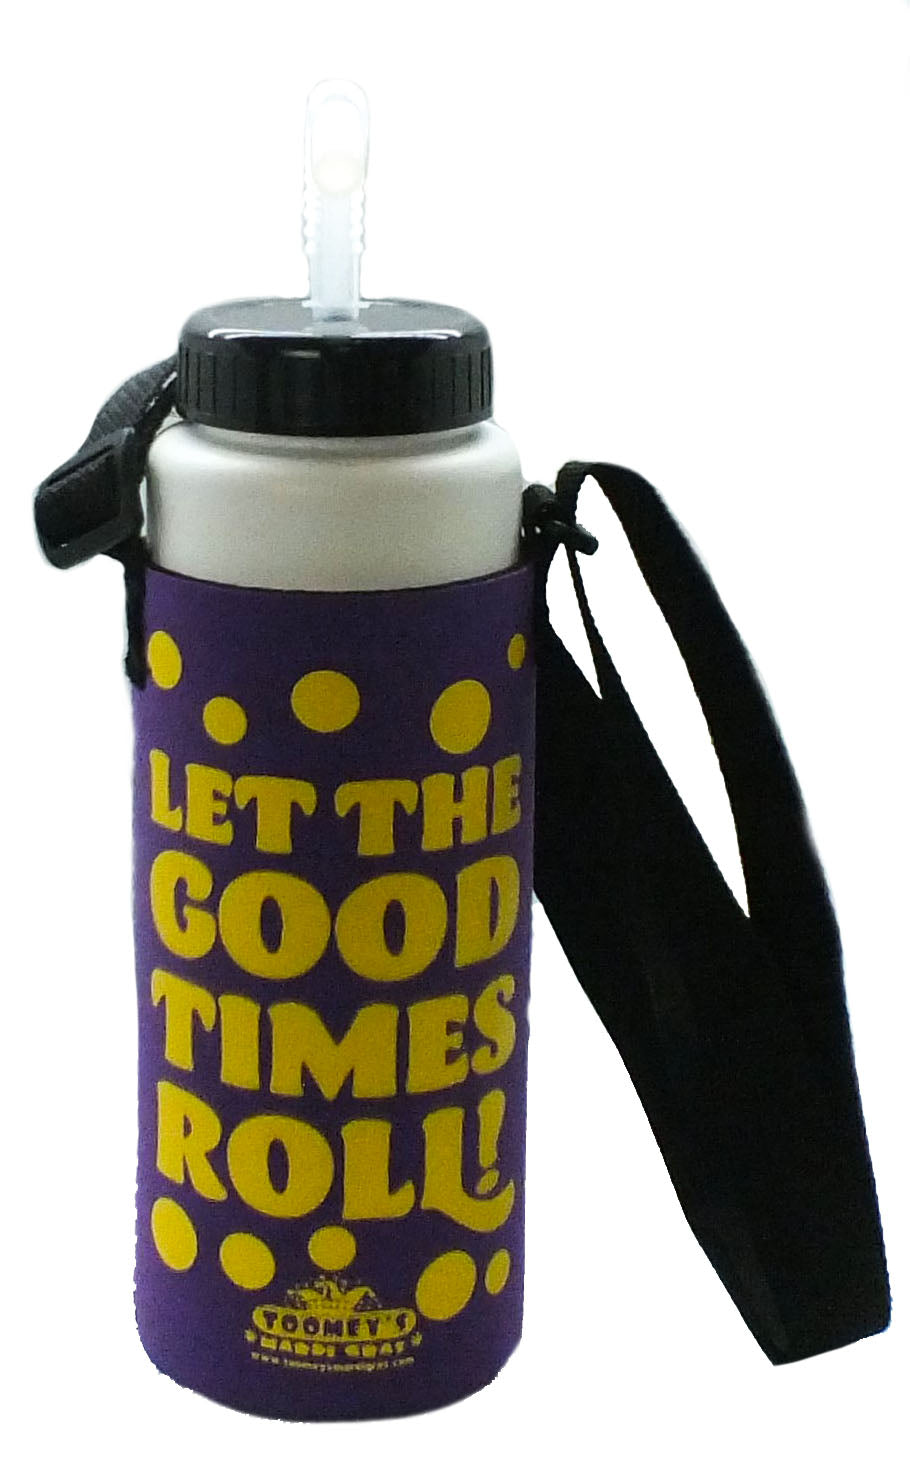 Meet our new Sports Bottle